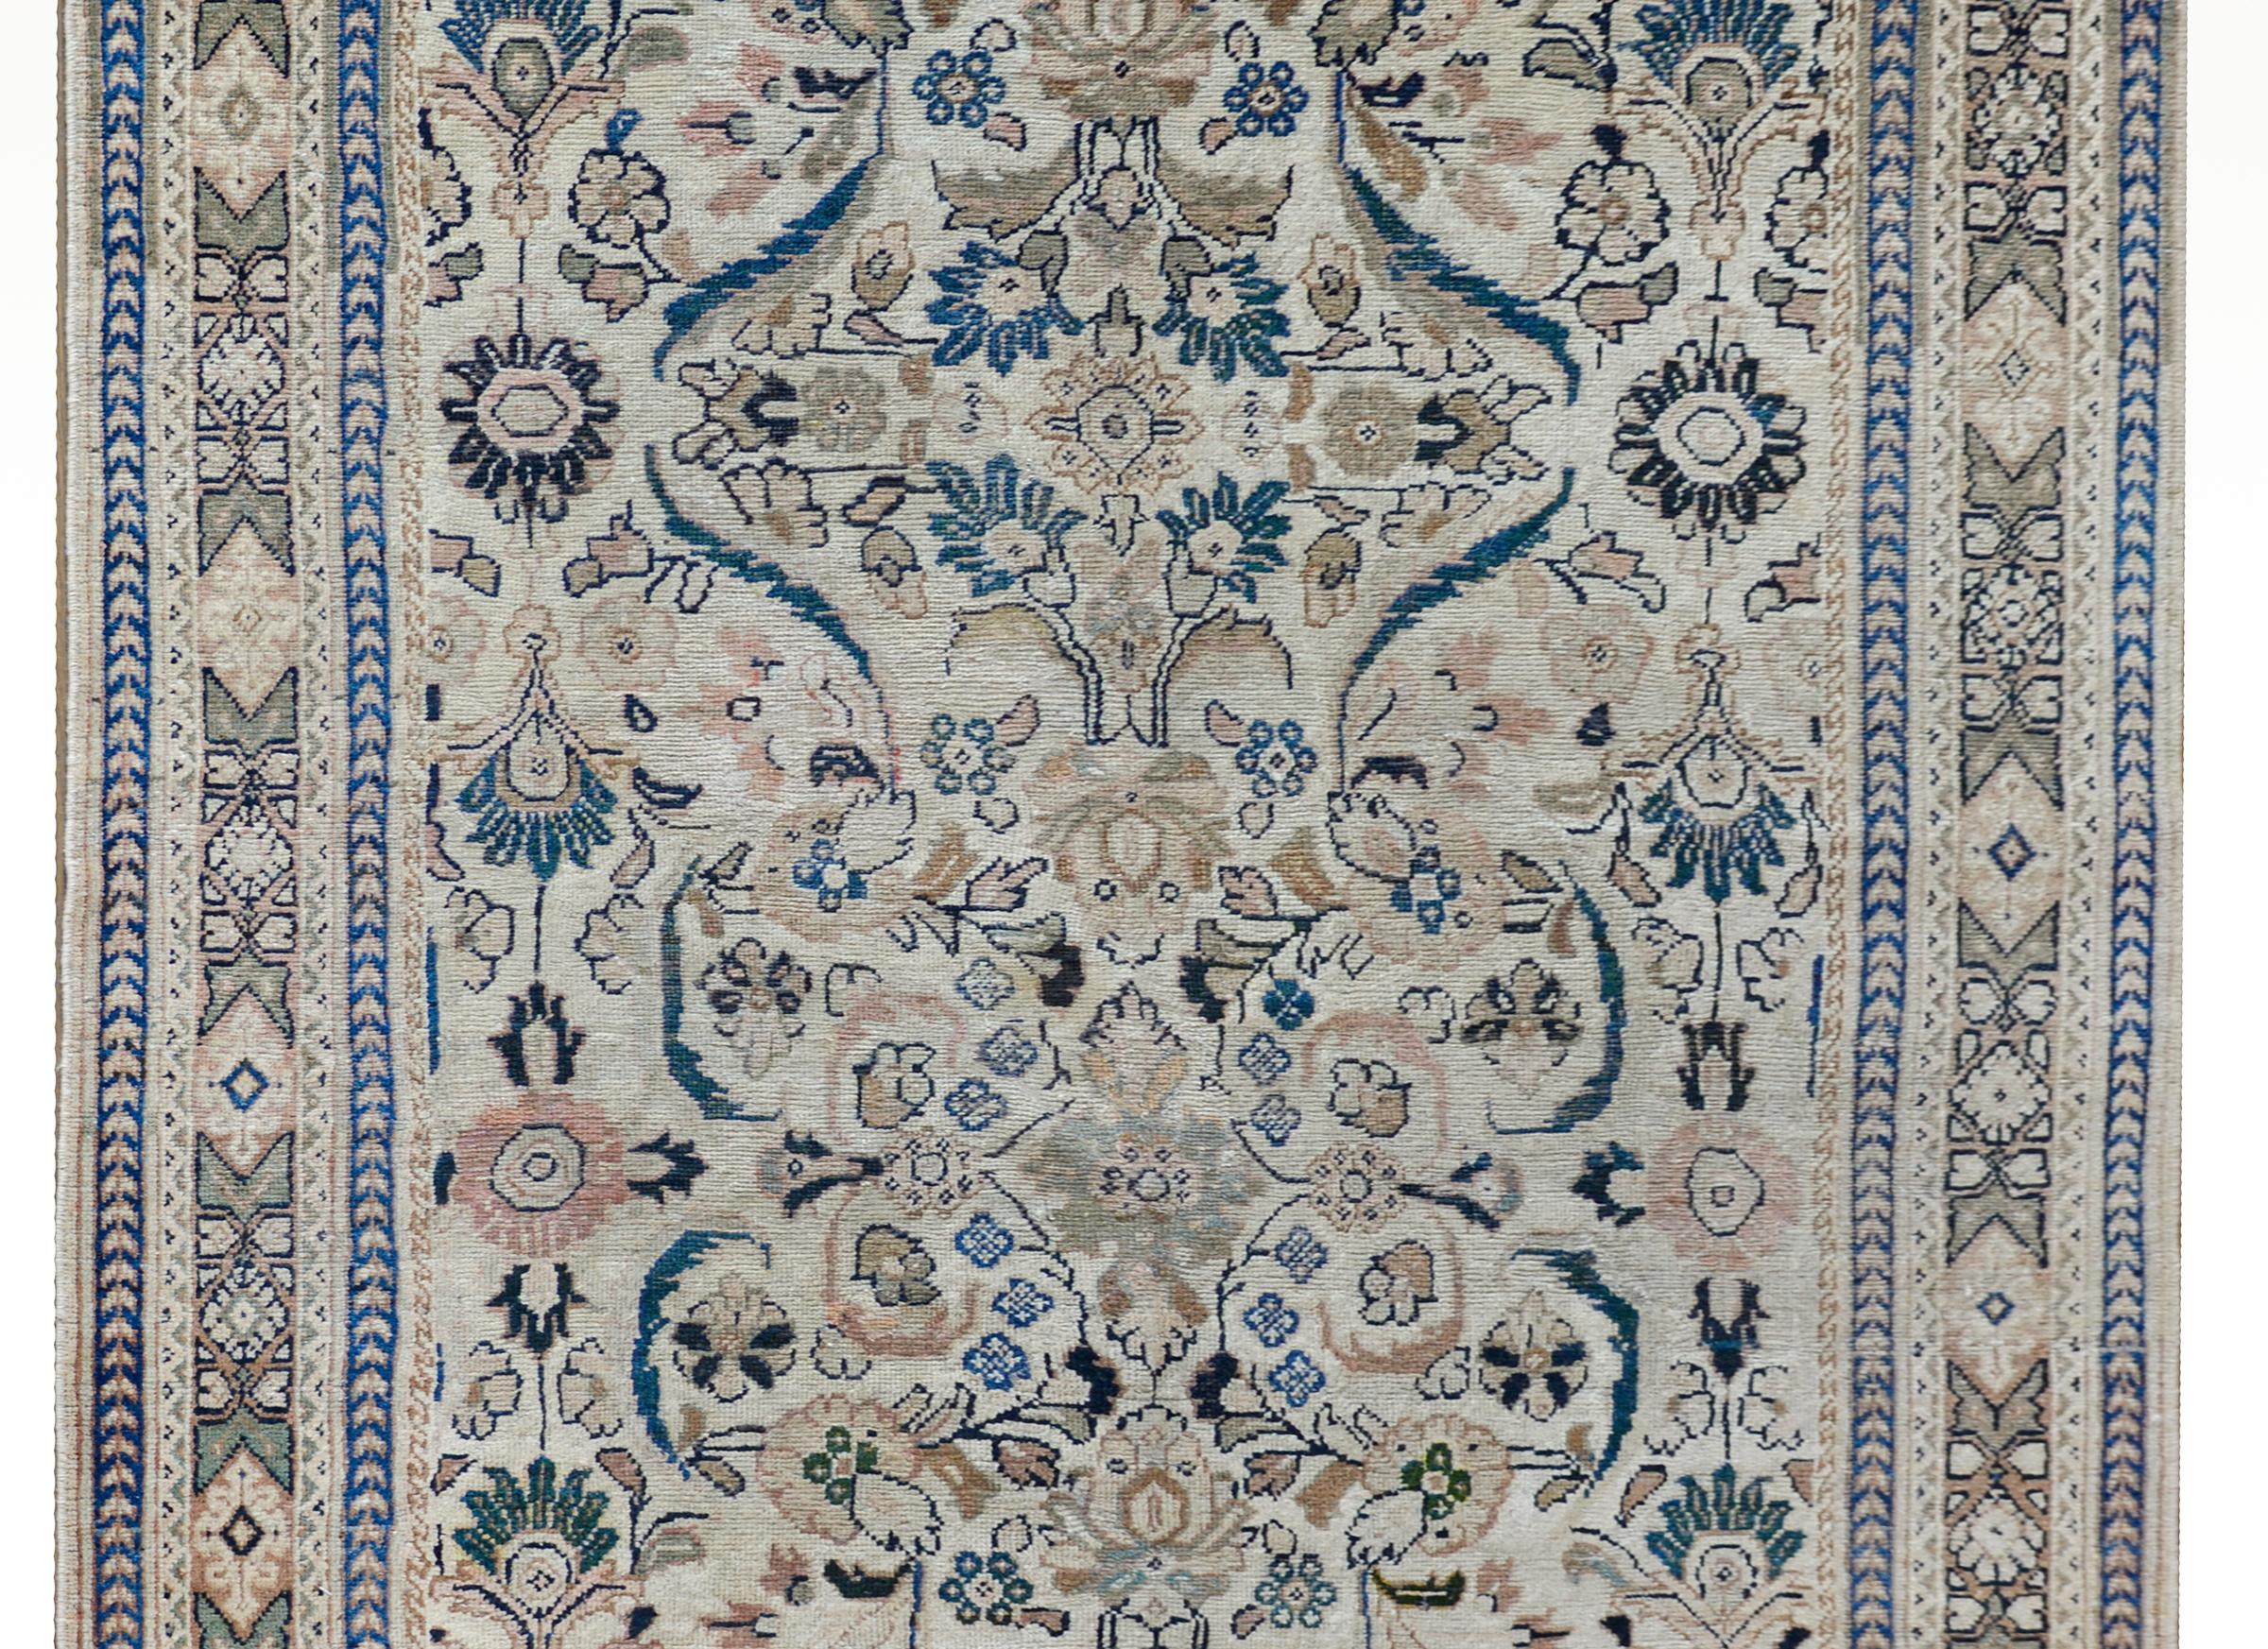 A gorgeous early 20th century Persian Mahal rug with a large-scale mirrored floral and scrolling vine patterned field woven in light and dark indigo, pink, green, and cream, and surrounded by a wide border with a central stylized floral patterned